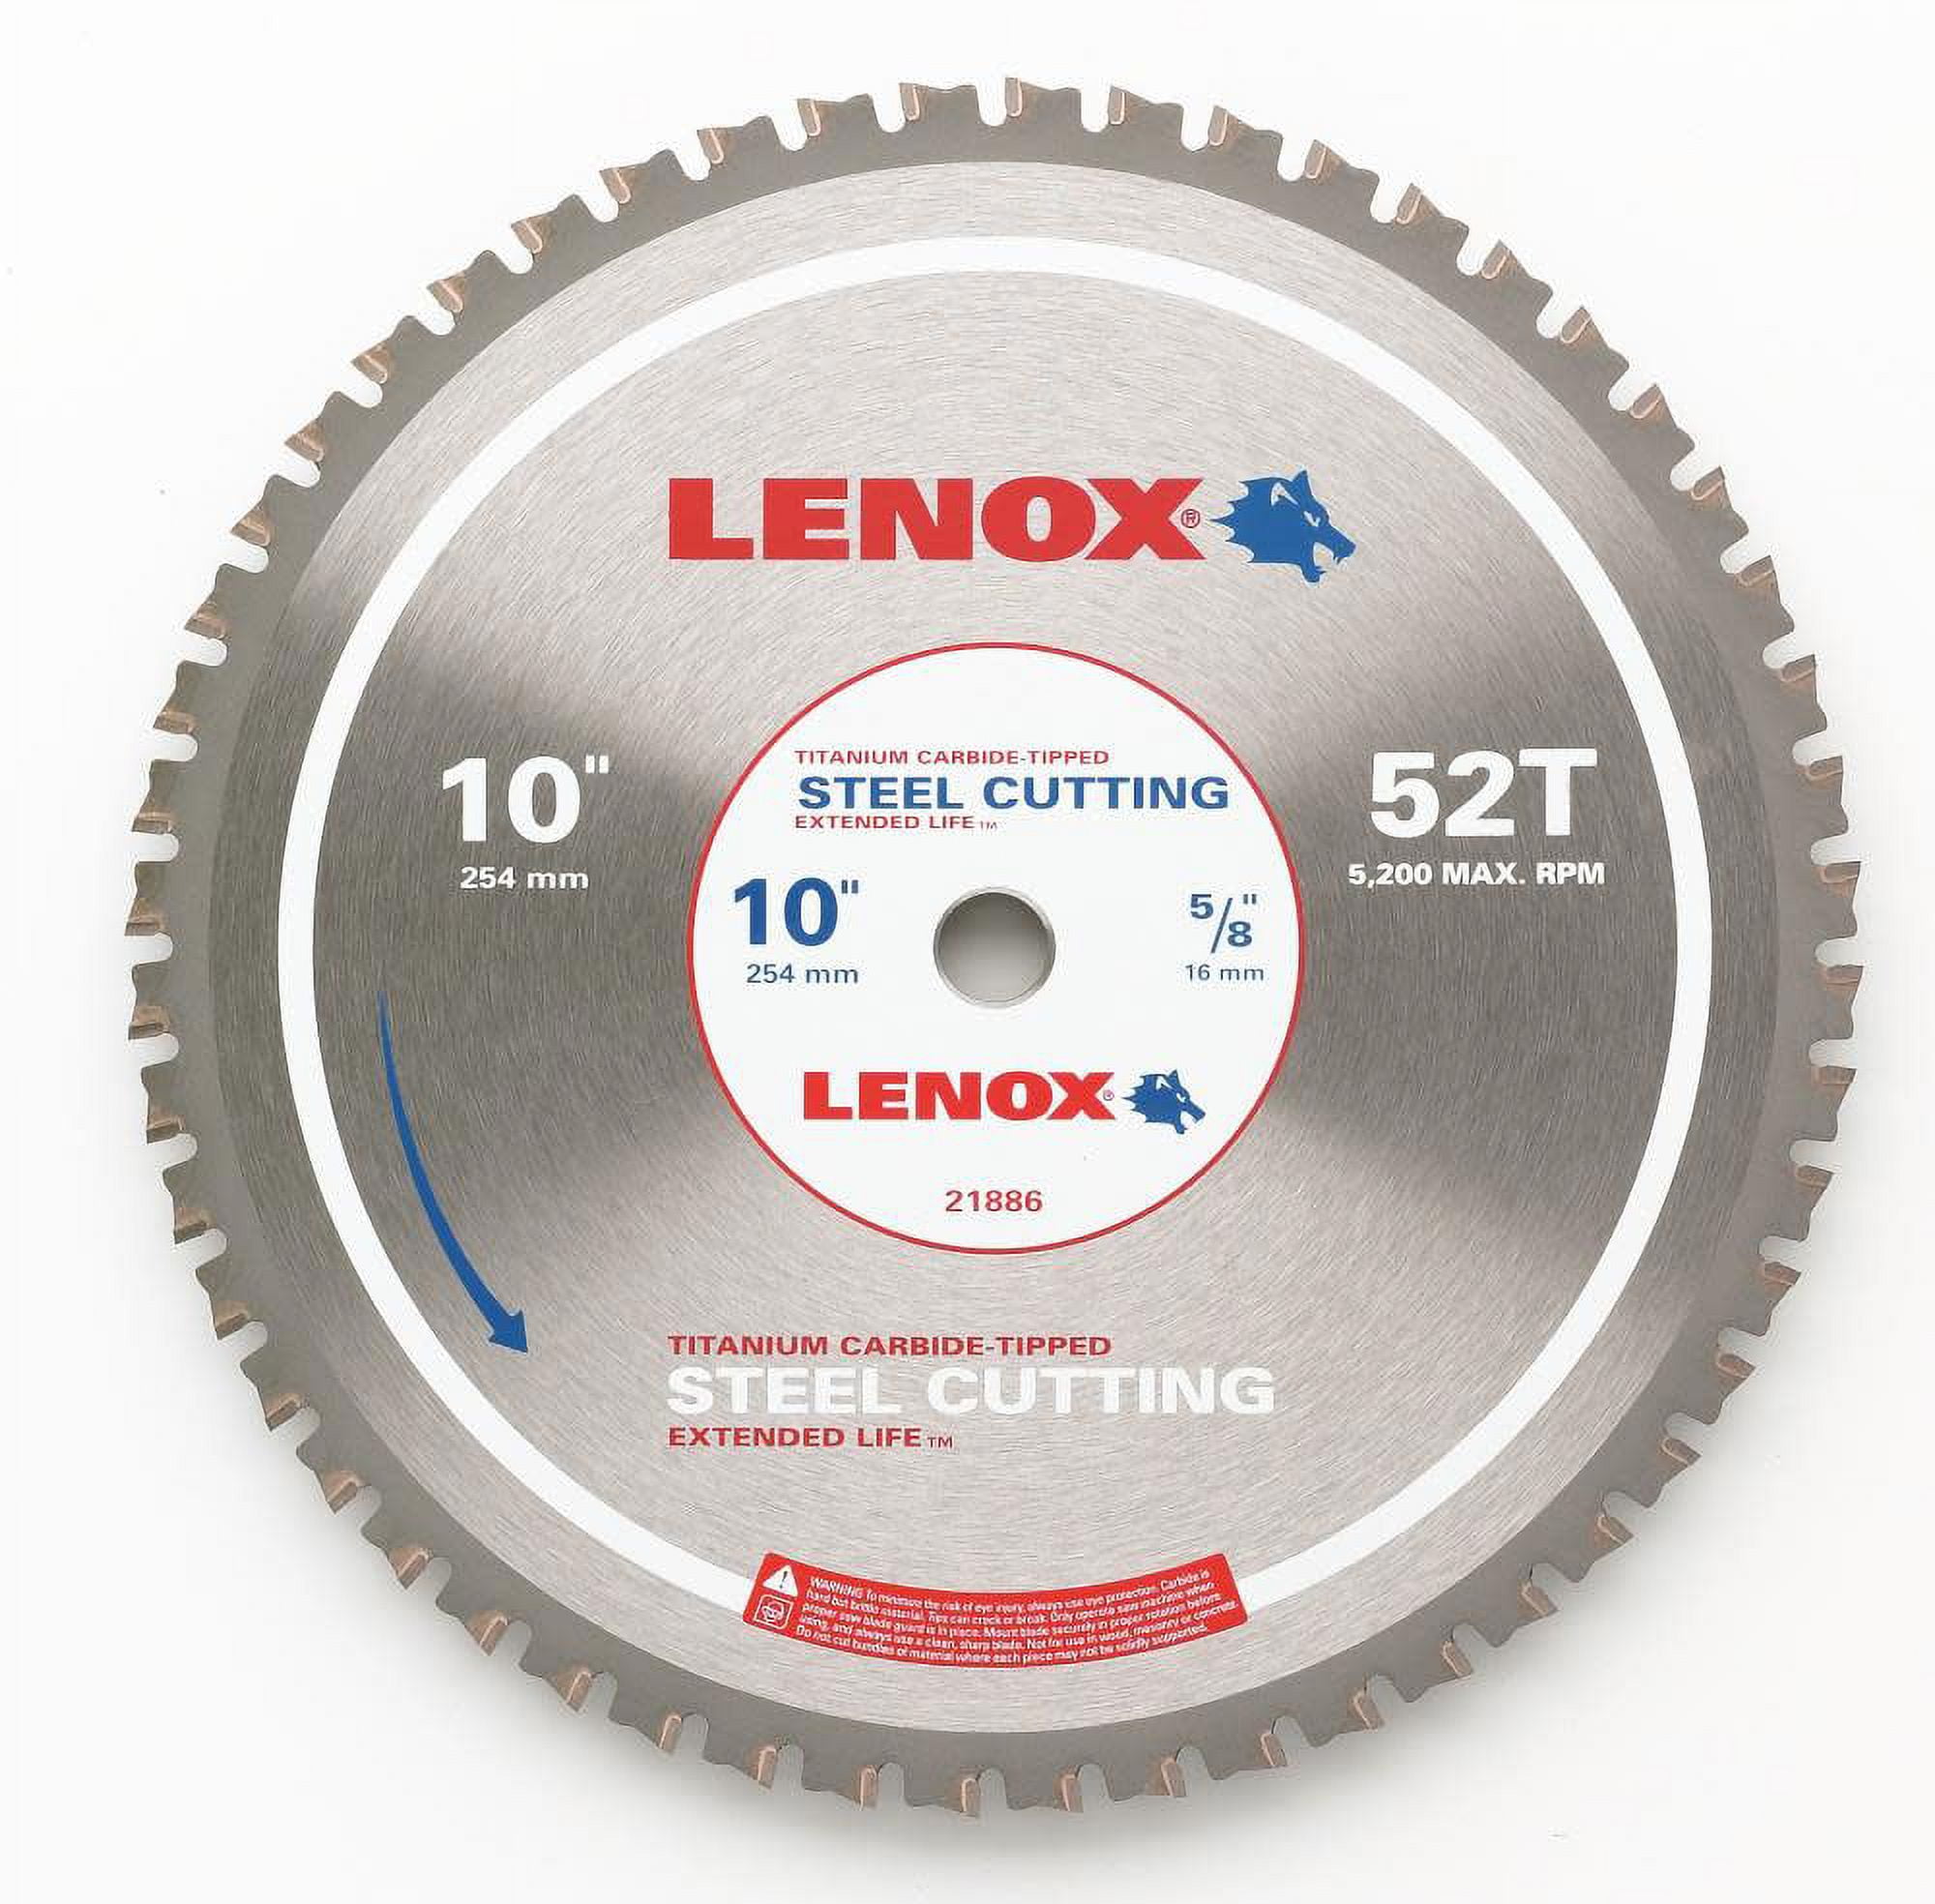 Lenox 21886ST100052CT 10 (254mm) 52 Tooth Count Metal Cutting Circular Saw  Blade For Steel